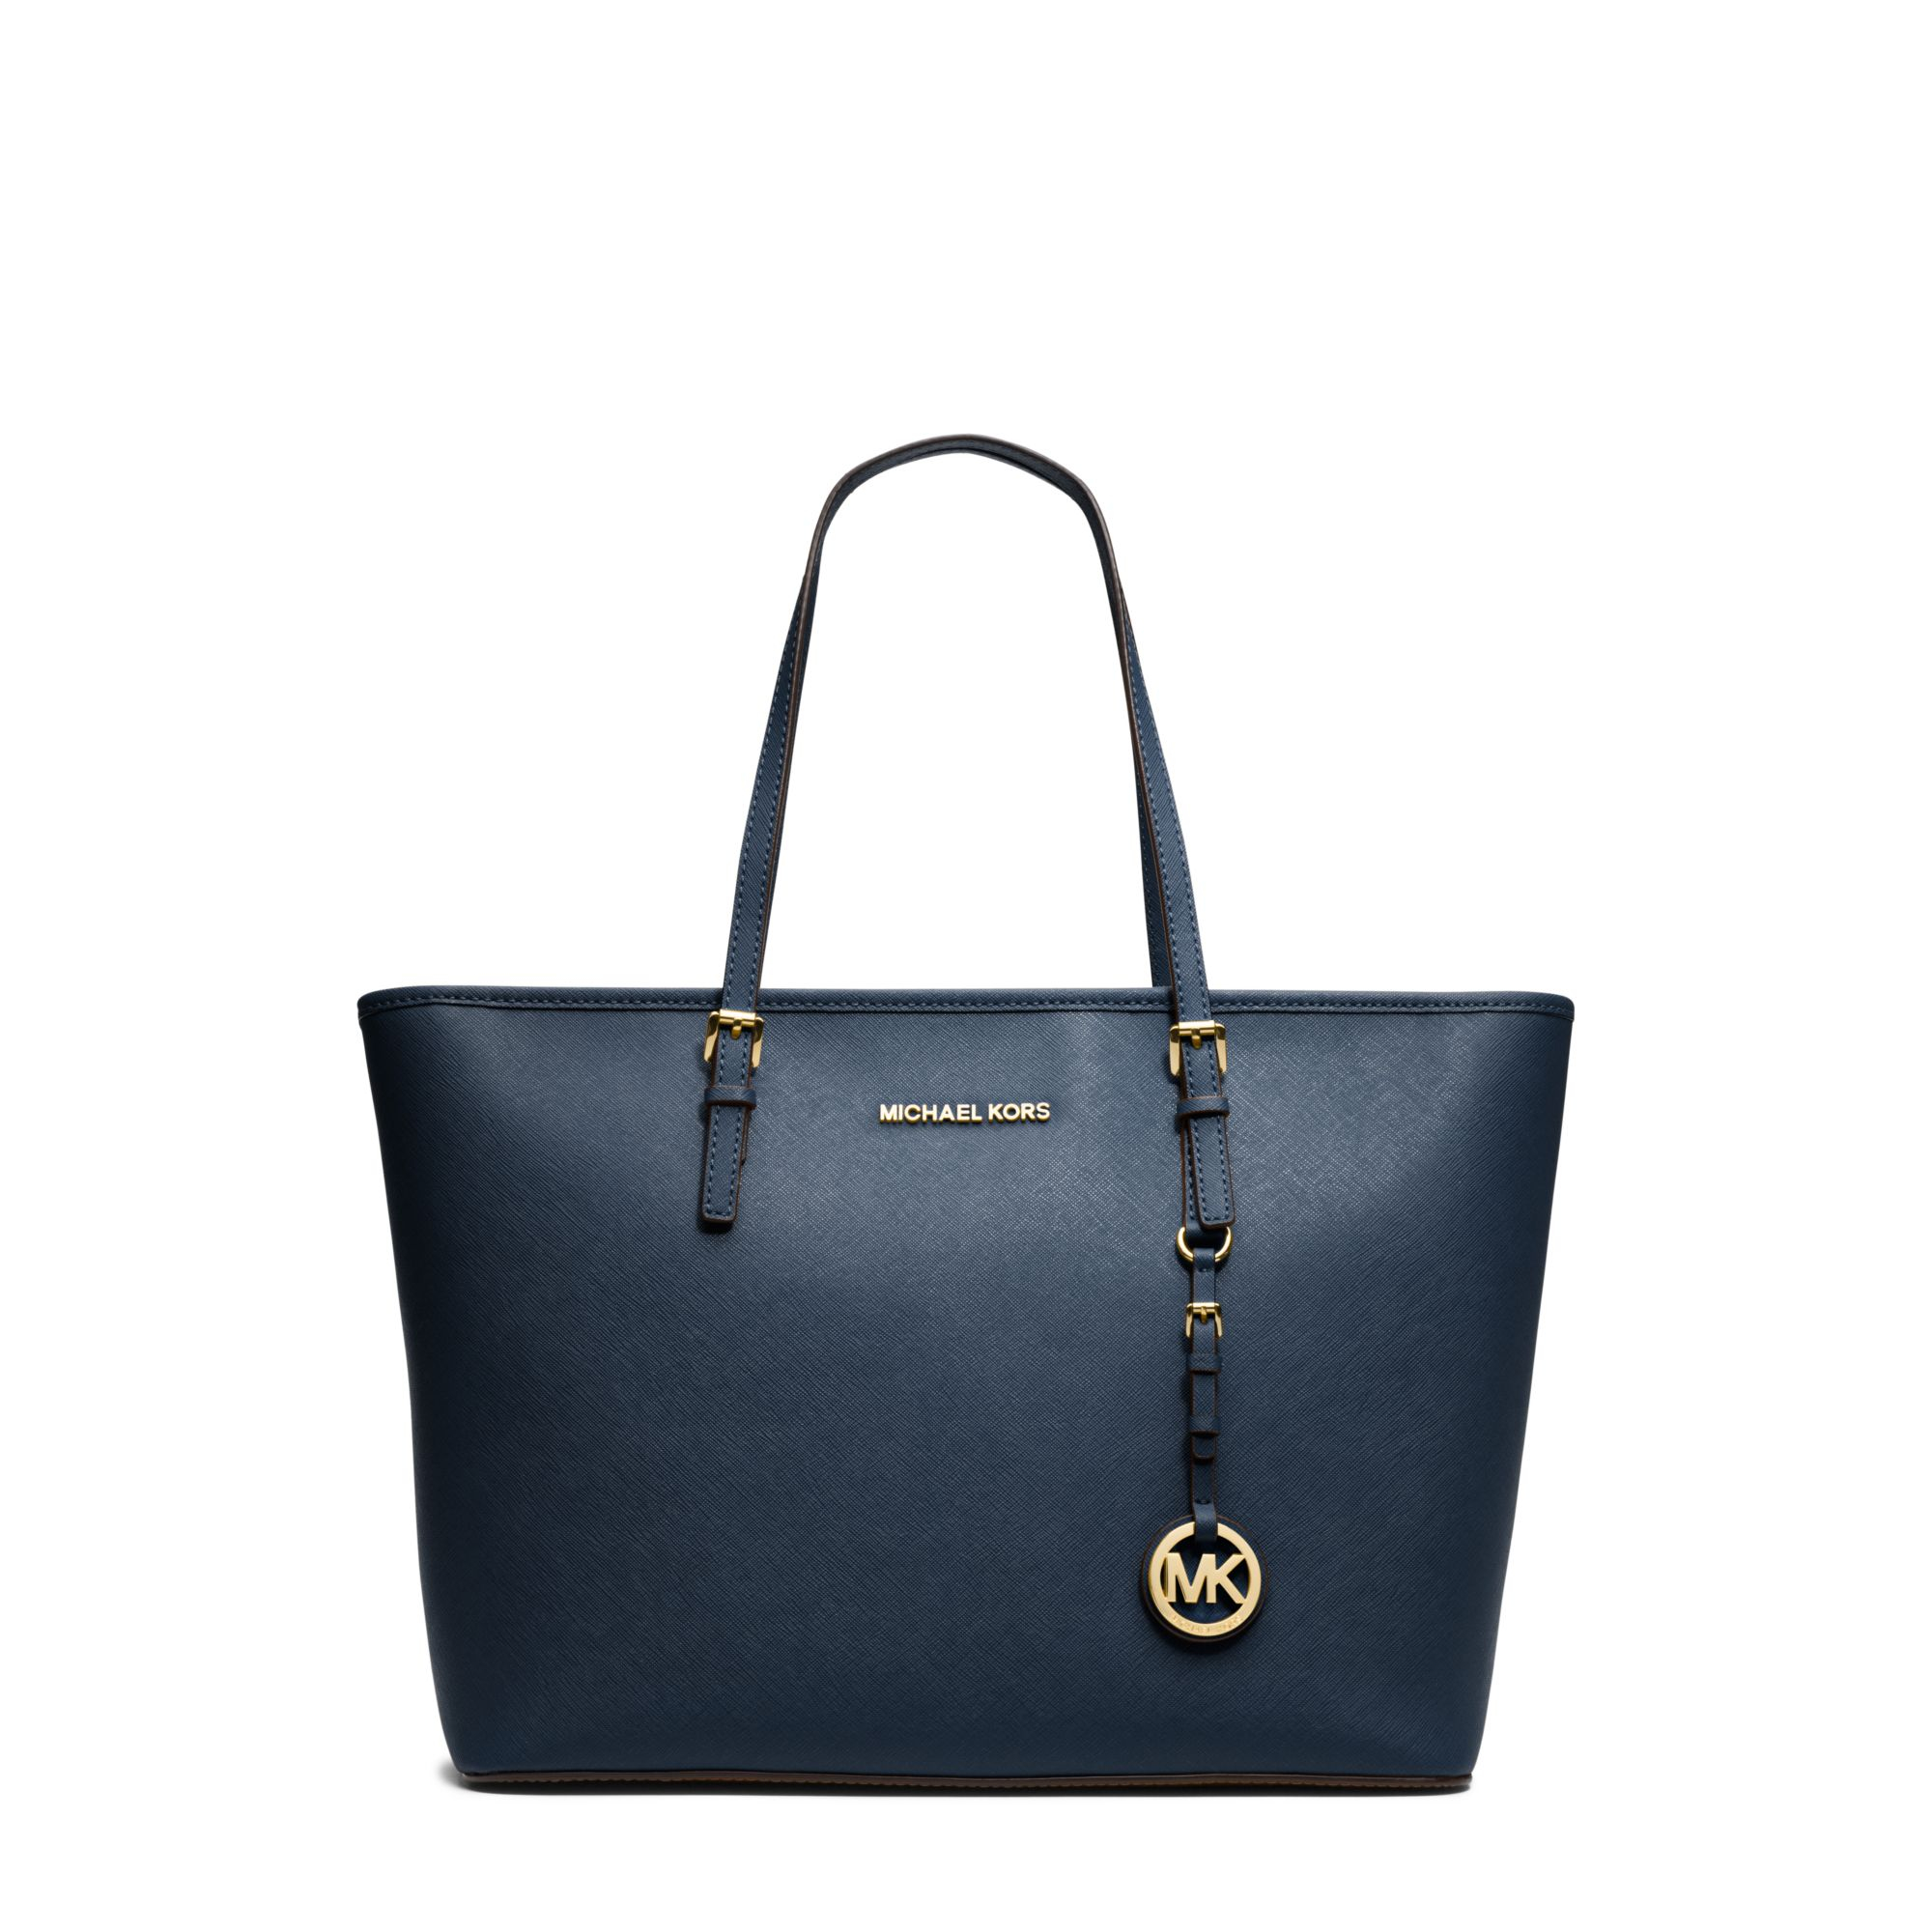 Michael Kors Jet Set Travel Saffiano Leather Top-zip Tote in Navy (Blue) -  Lyst